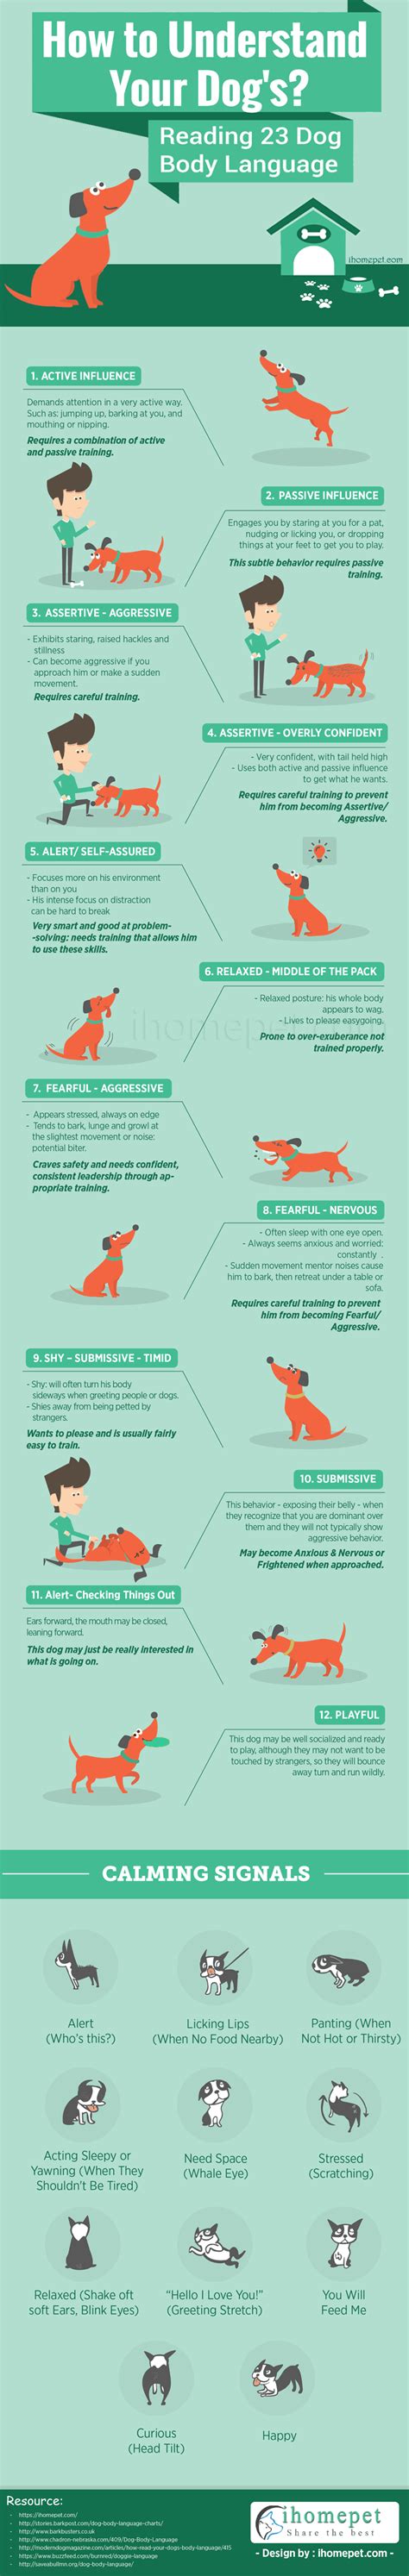 How To Understand Dog Body Language Infographic